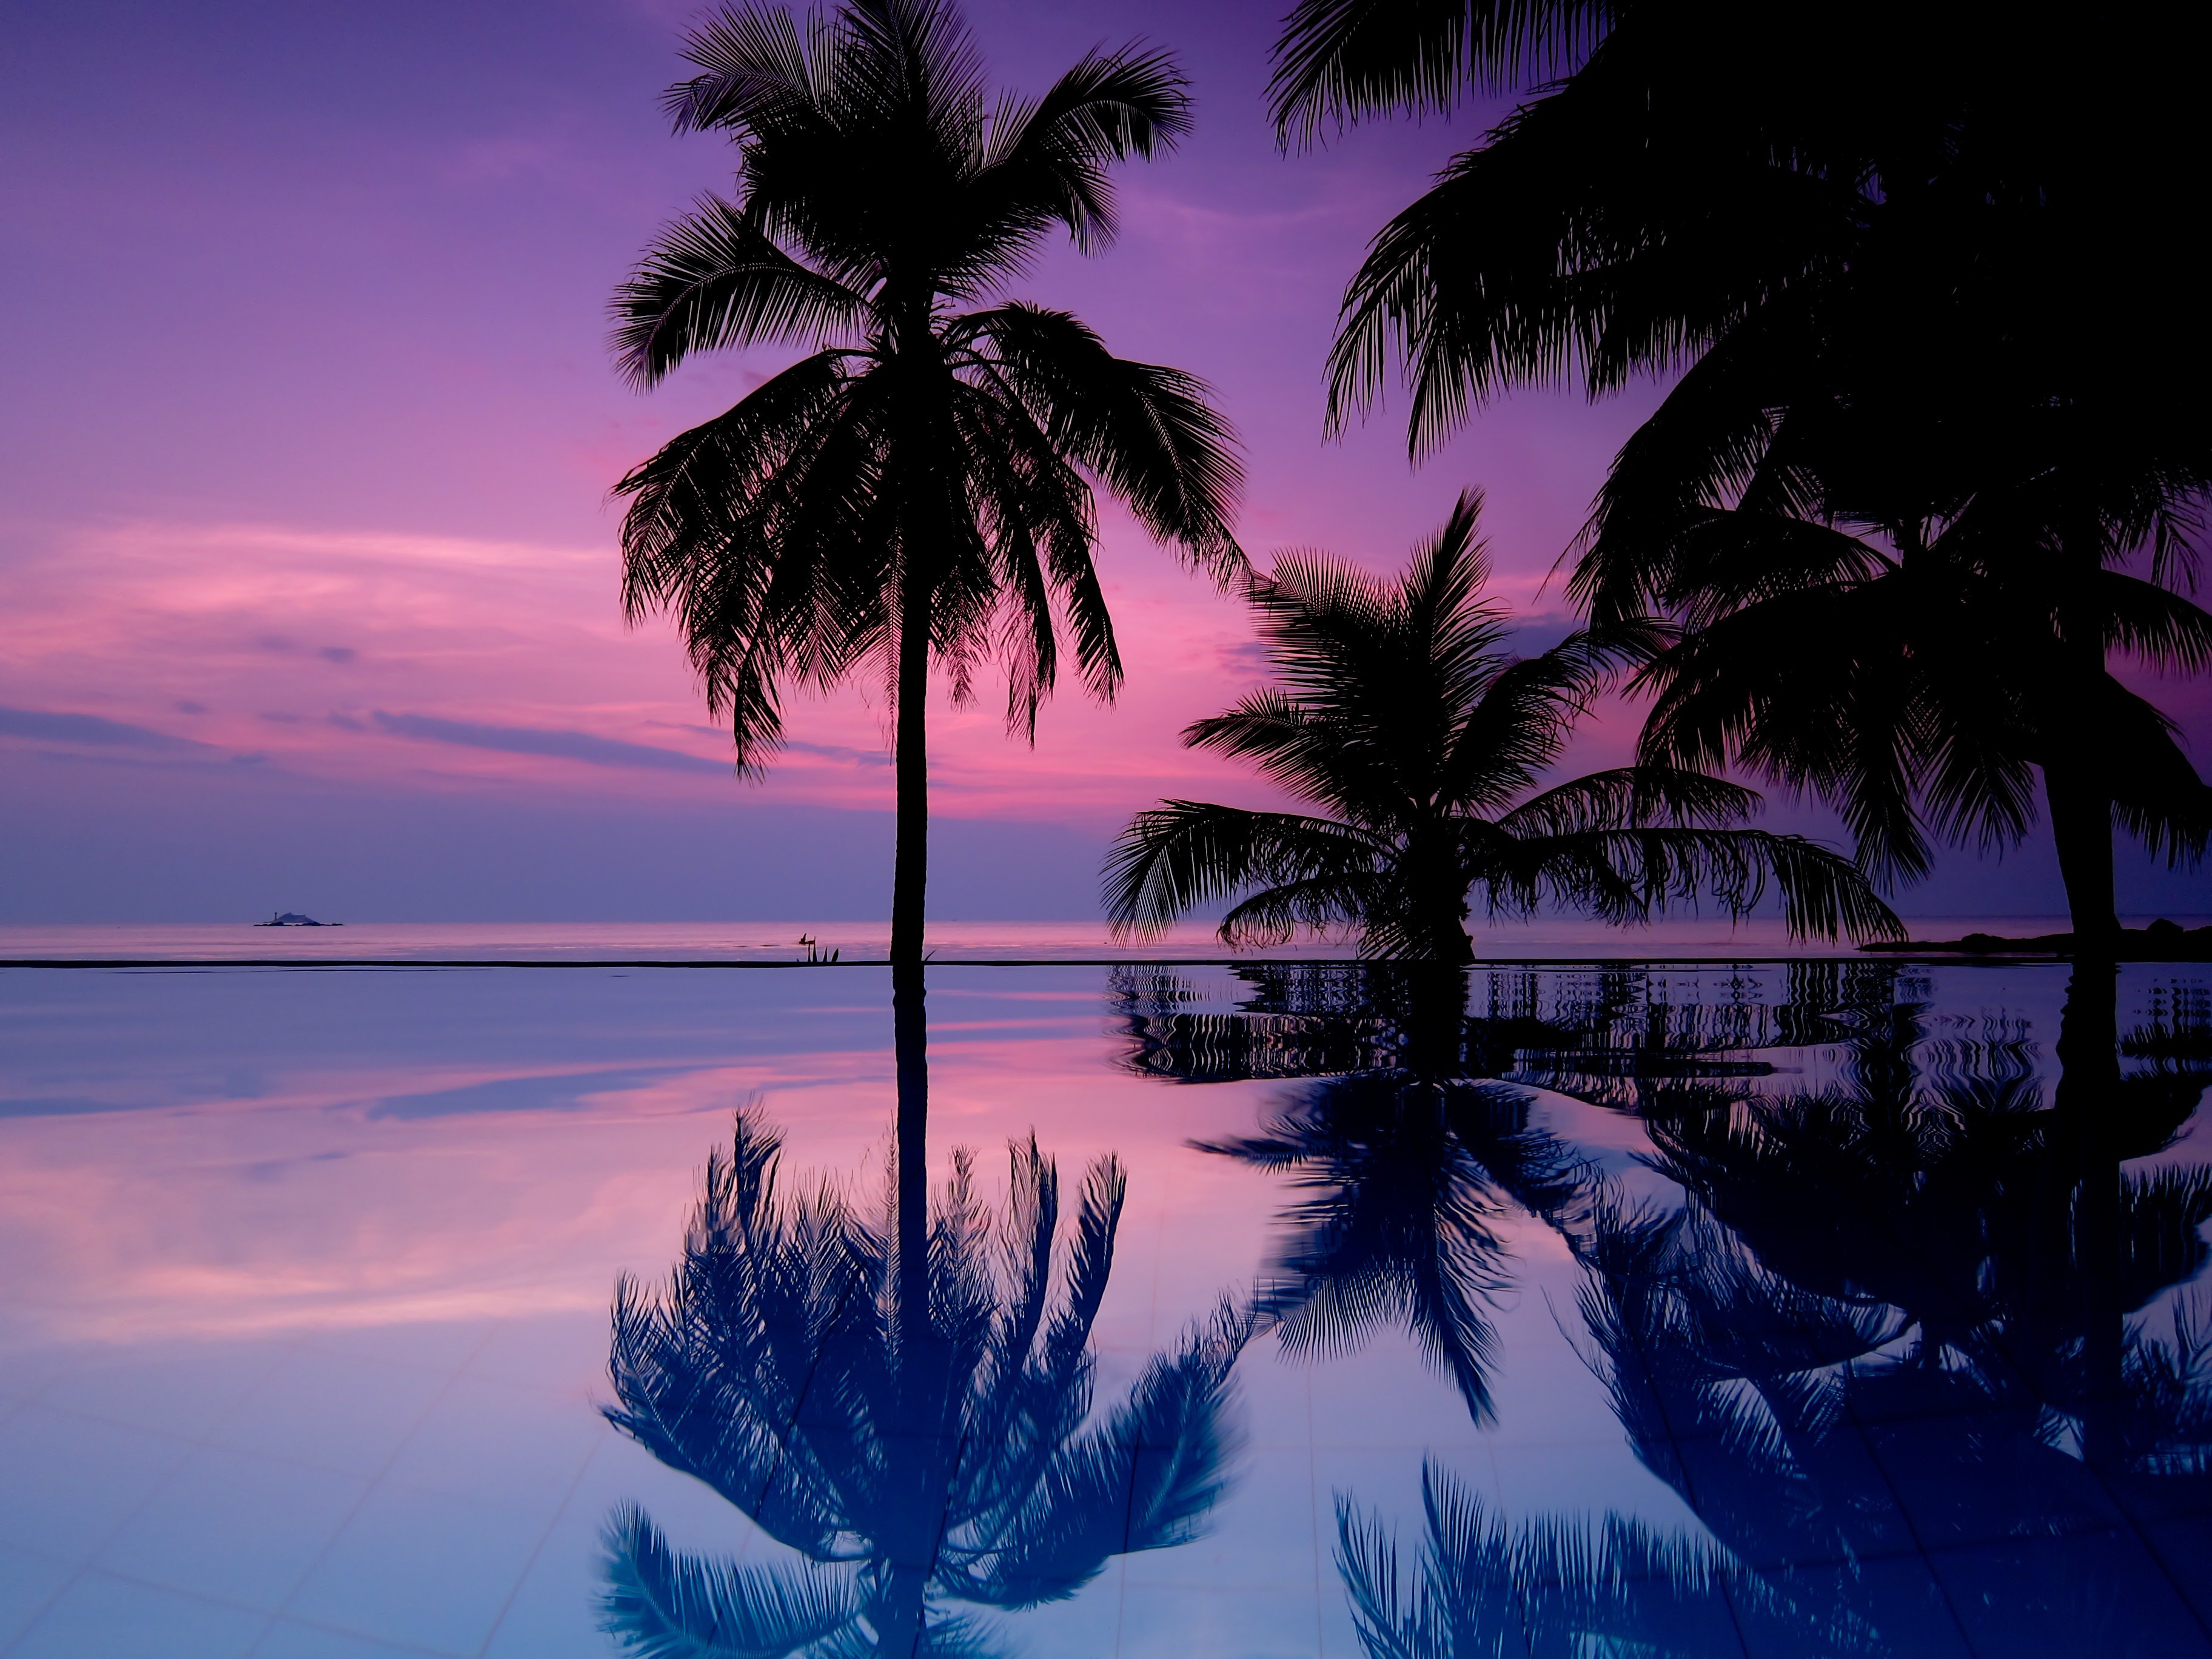 General 3648x2736 tropical purple sky palm trees sea outdoors water reflection